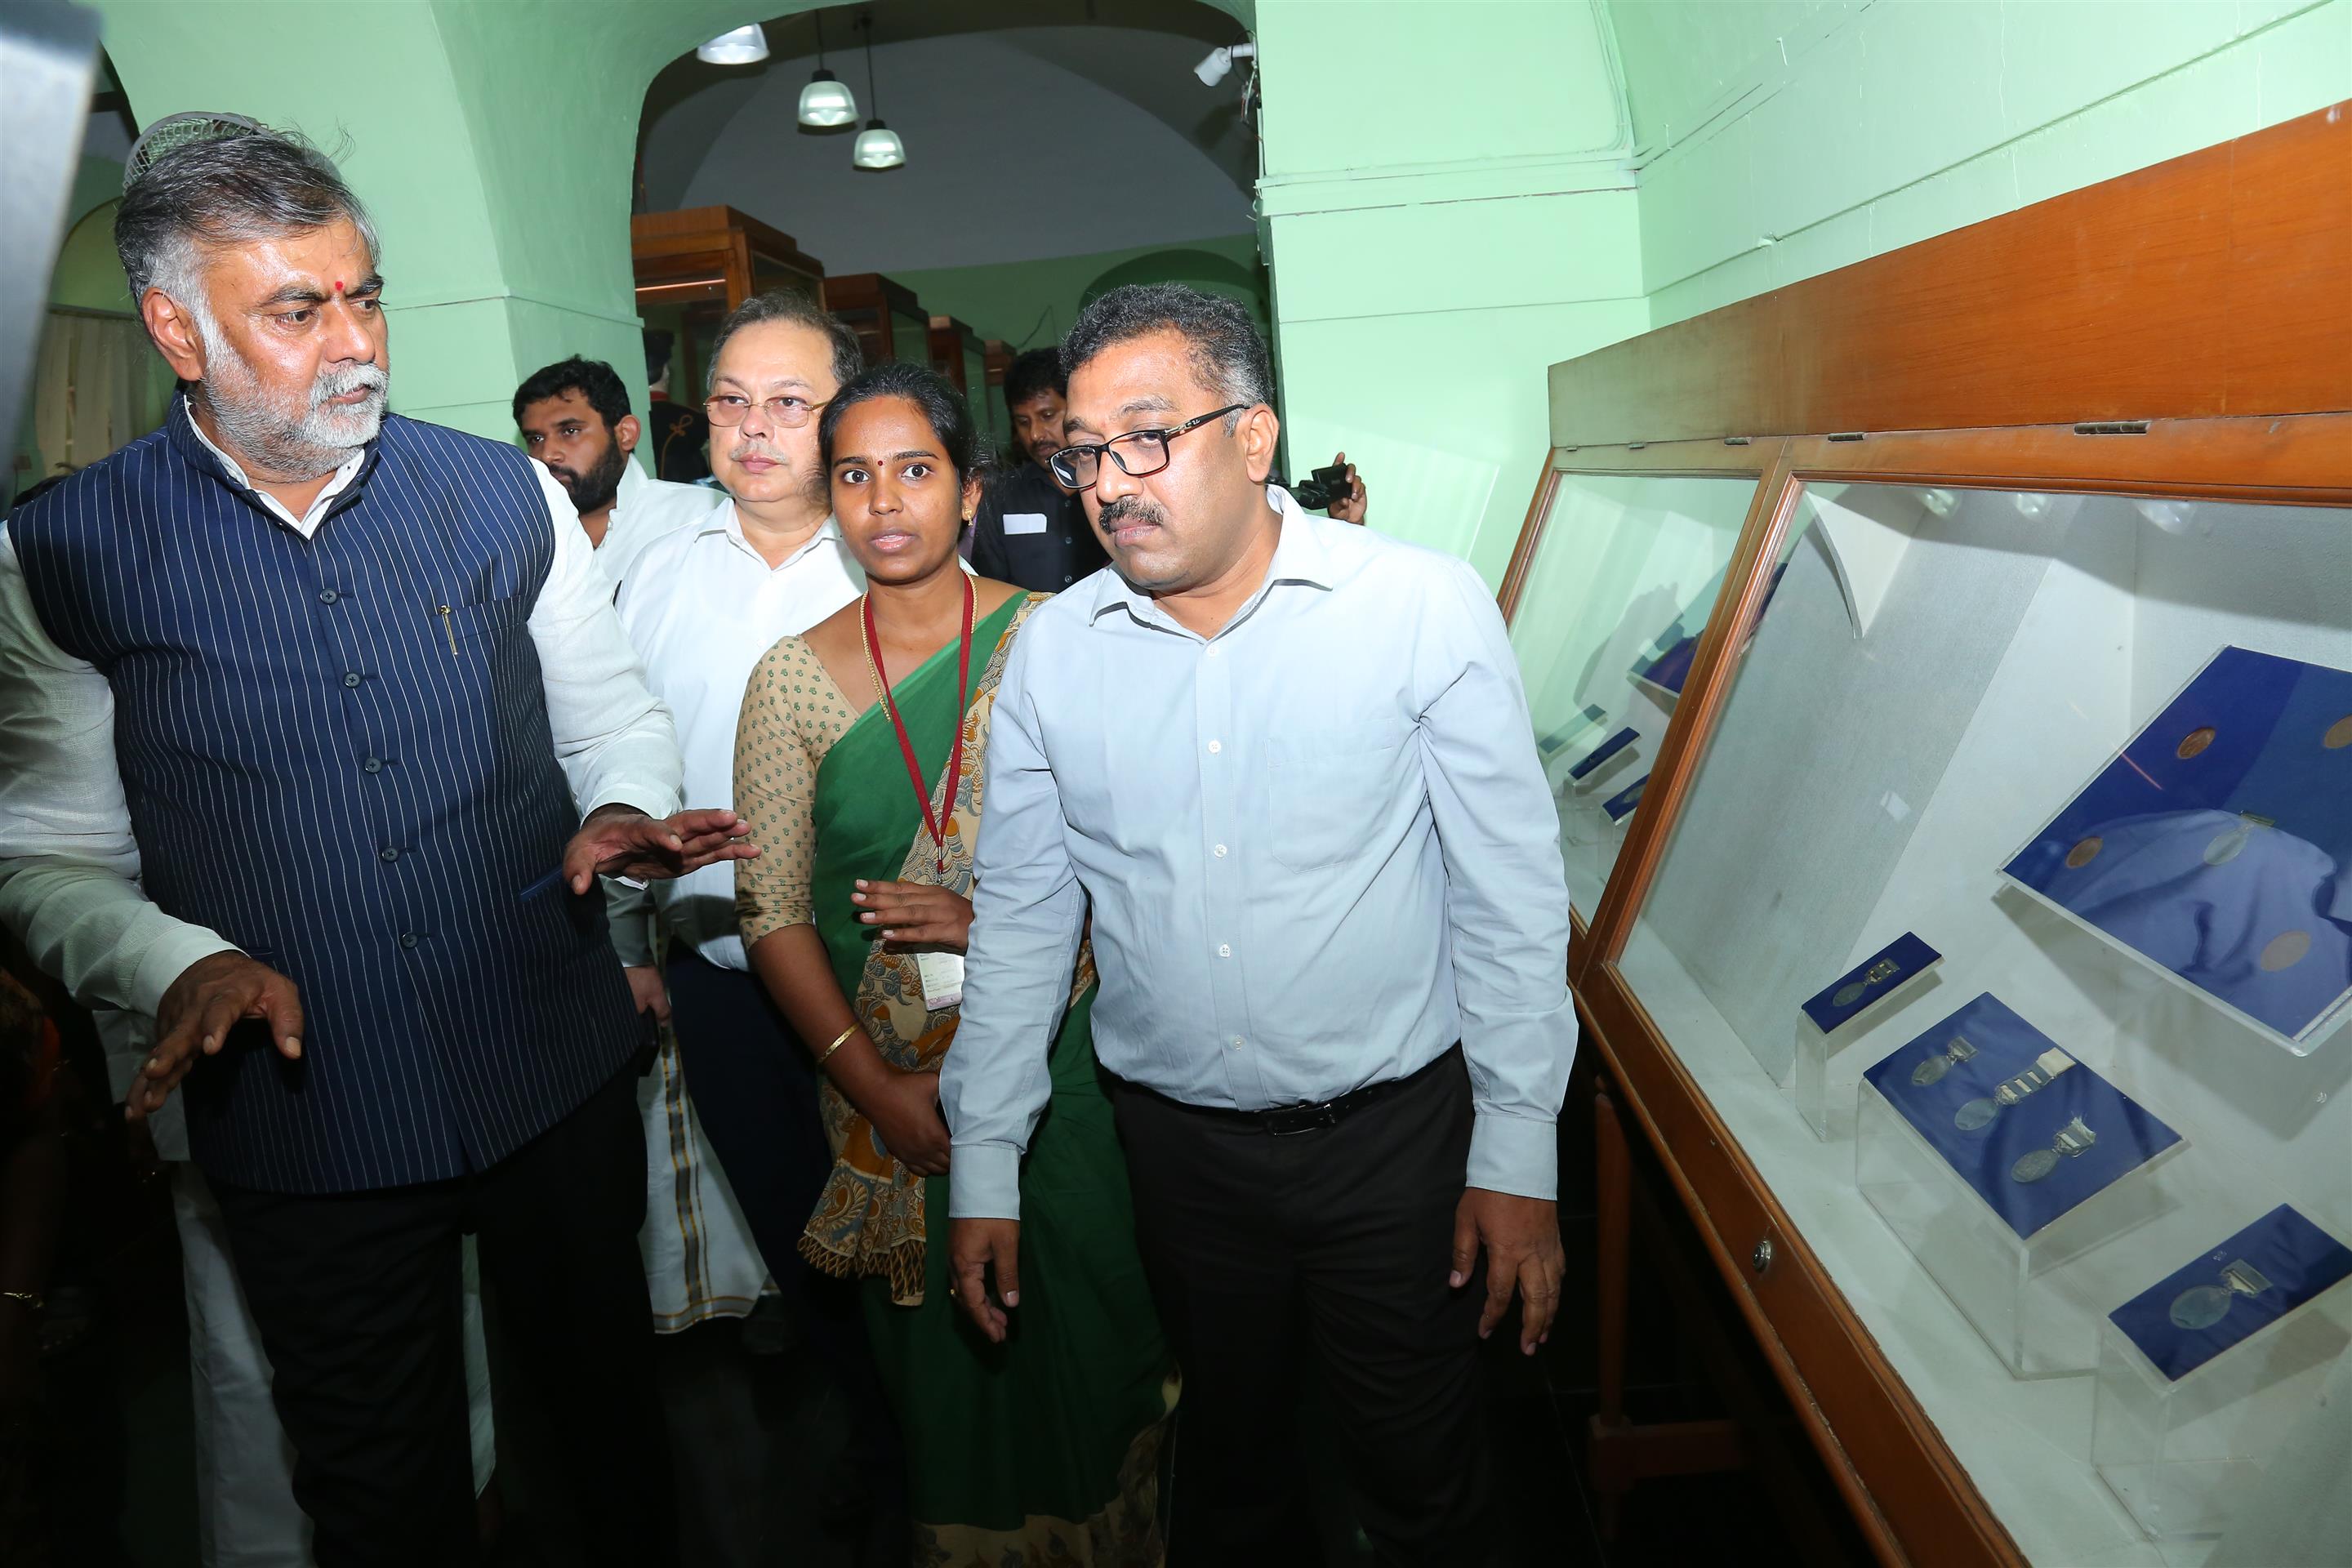 Shri Prahlad Singh Patel, Union Minister of State for Tourism and Culture (I/C) visiting the Fort St. George (Museum and Site of ASI) today in Chennai. (December 20, 2019)